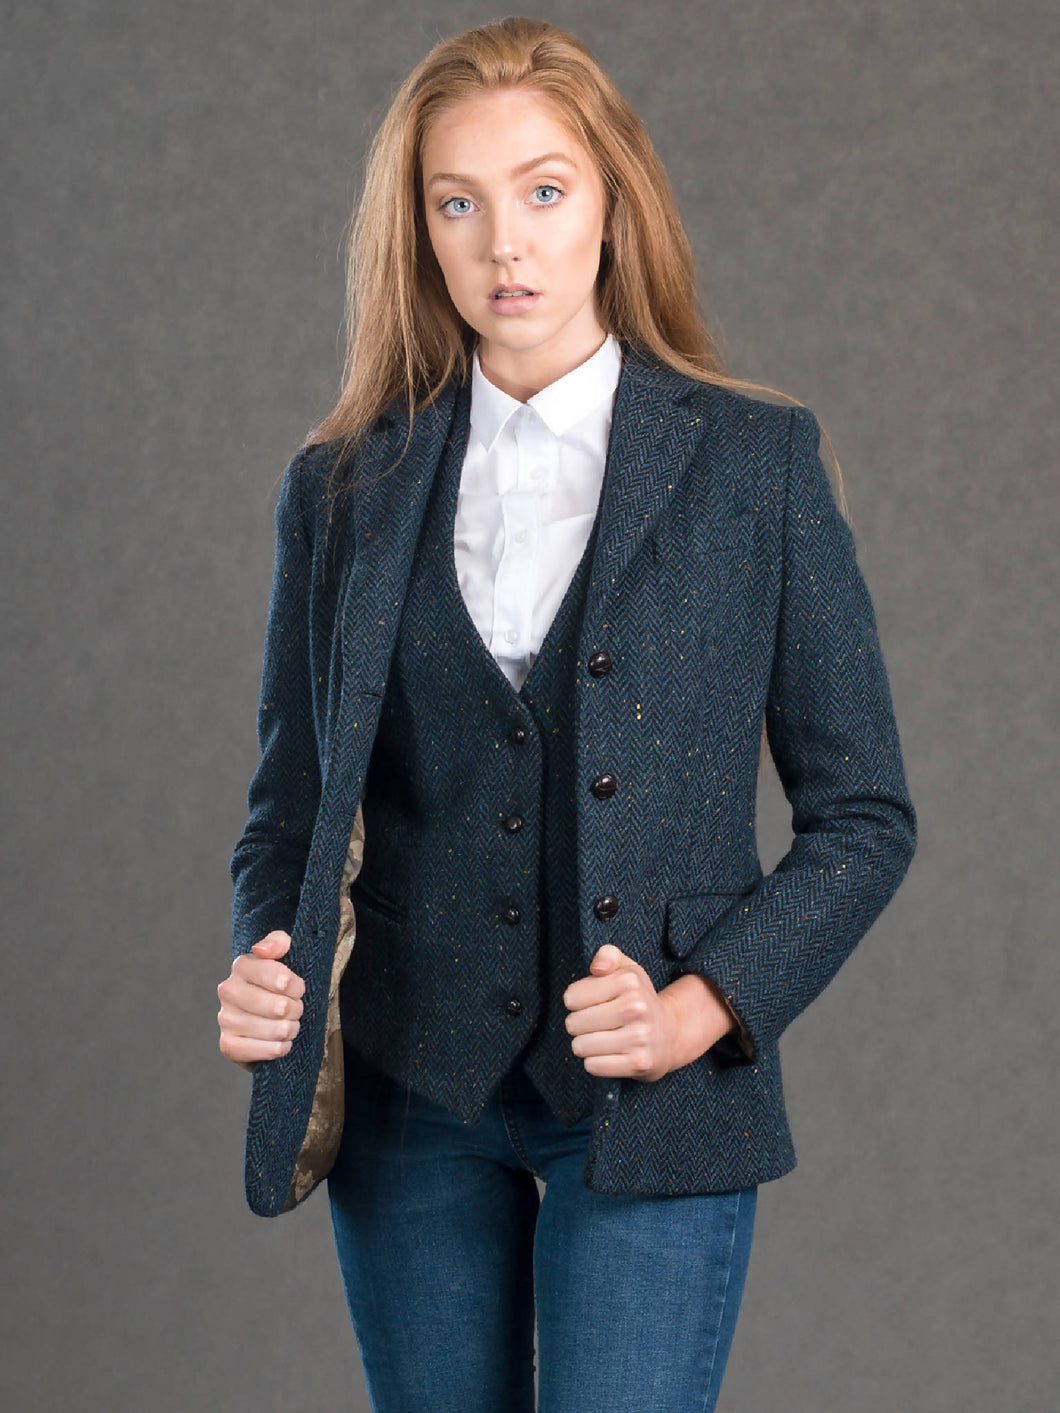 The Waterford Jacket